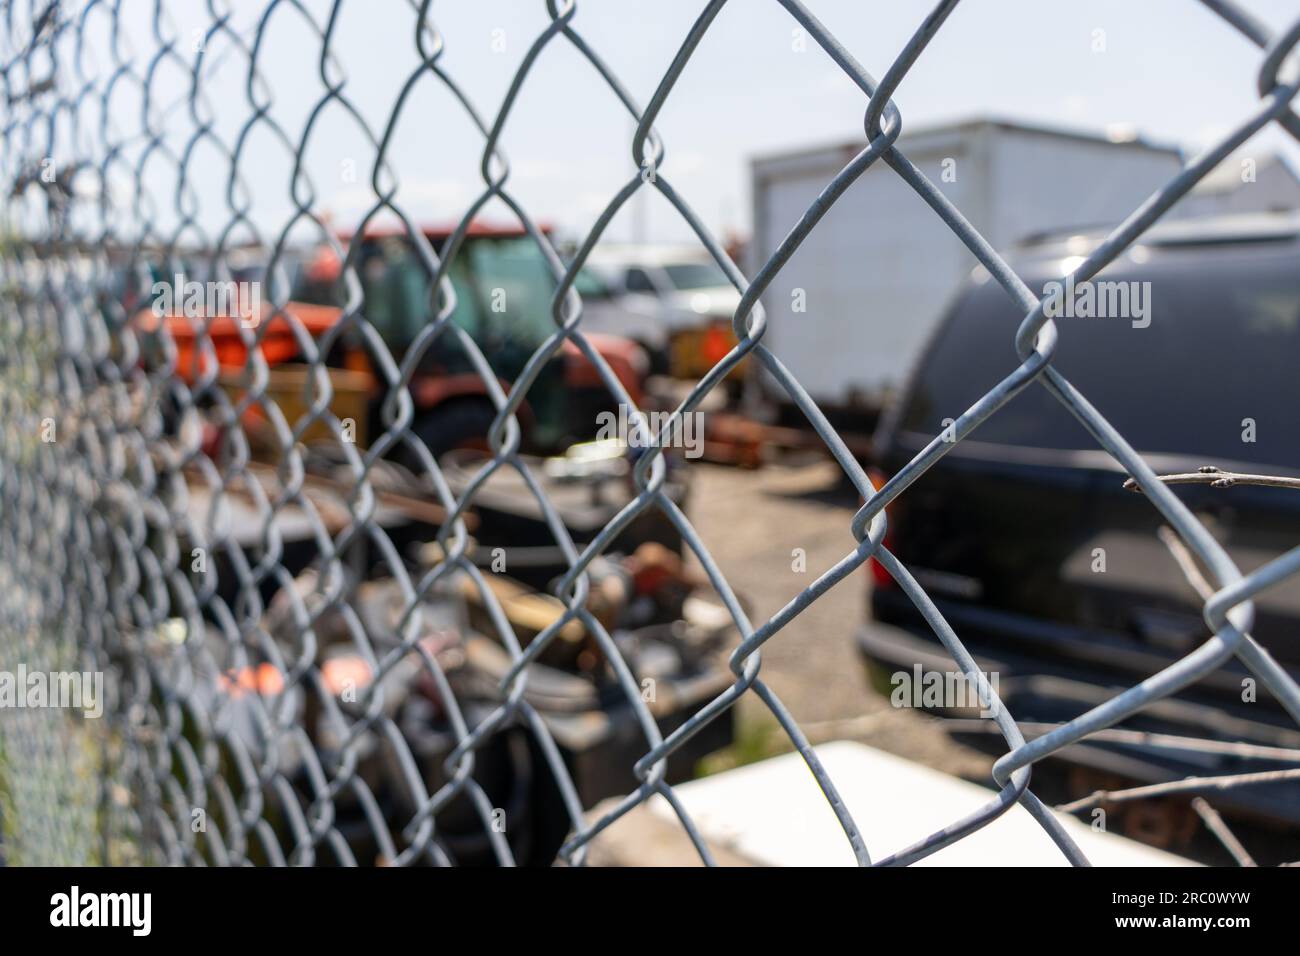 Side view of metal fence with vehicles behind - blurred background. Taken in Toronto, Canada. Stock Photo